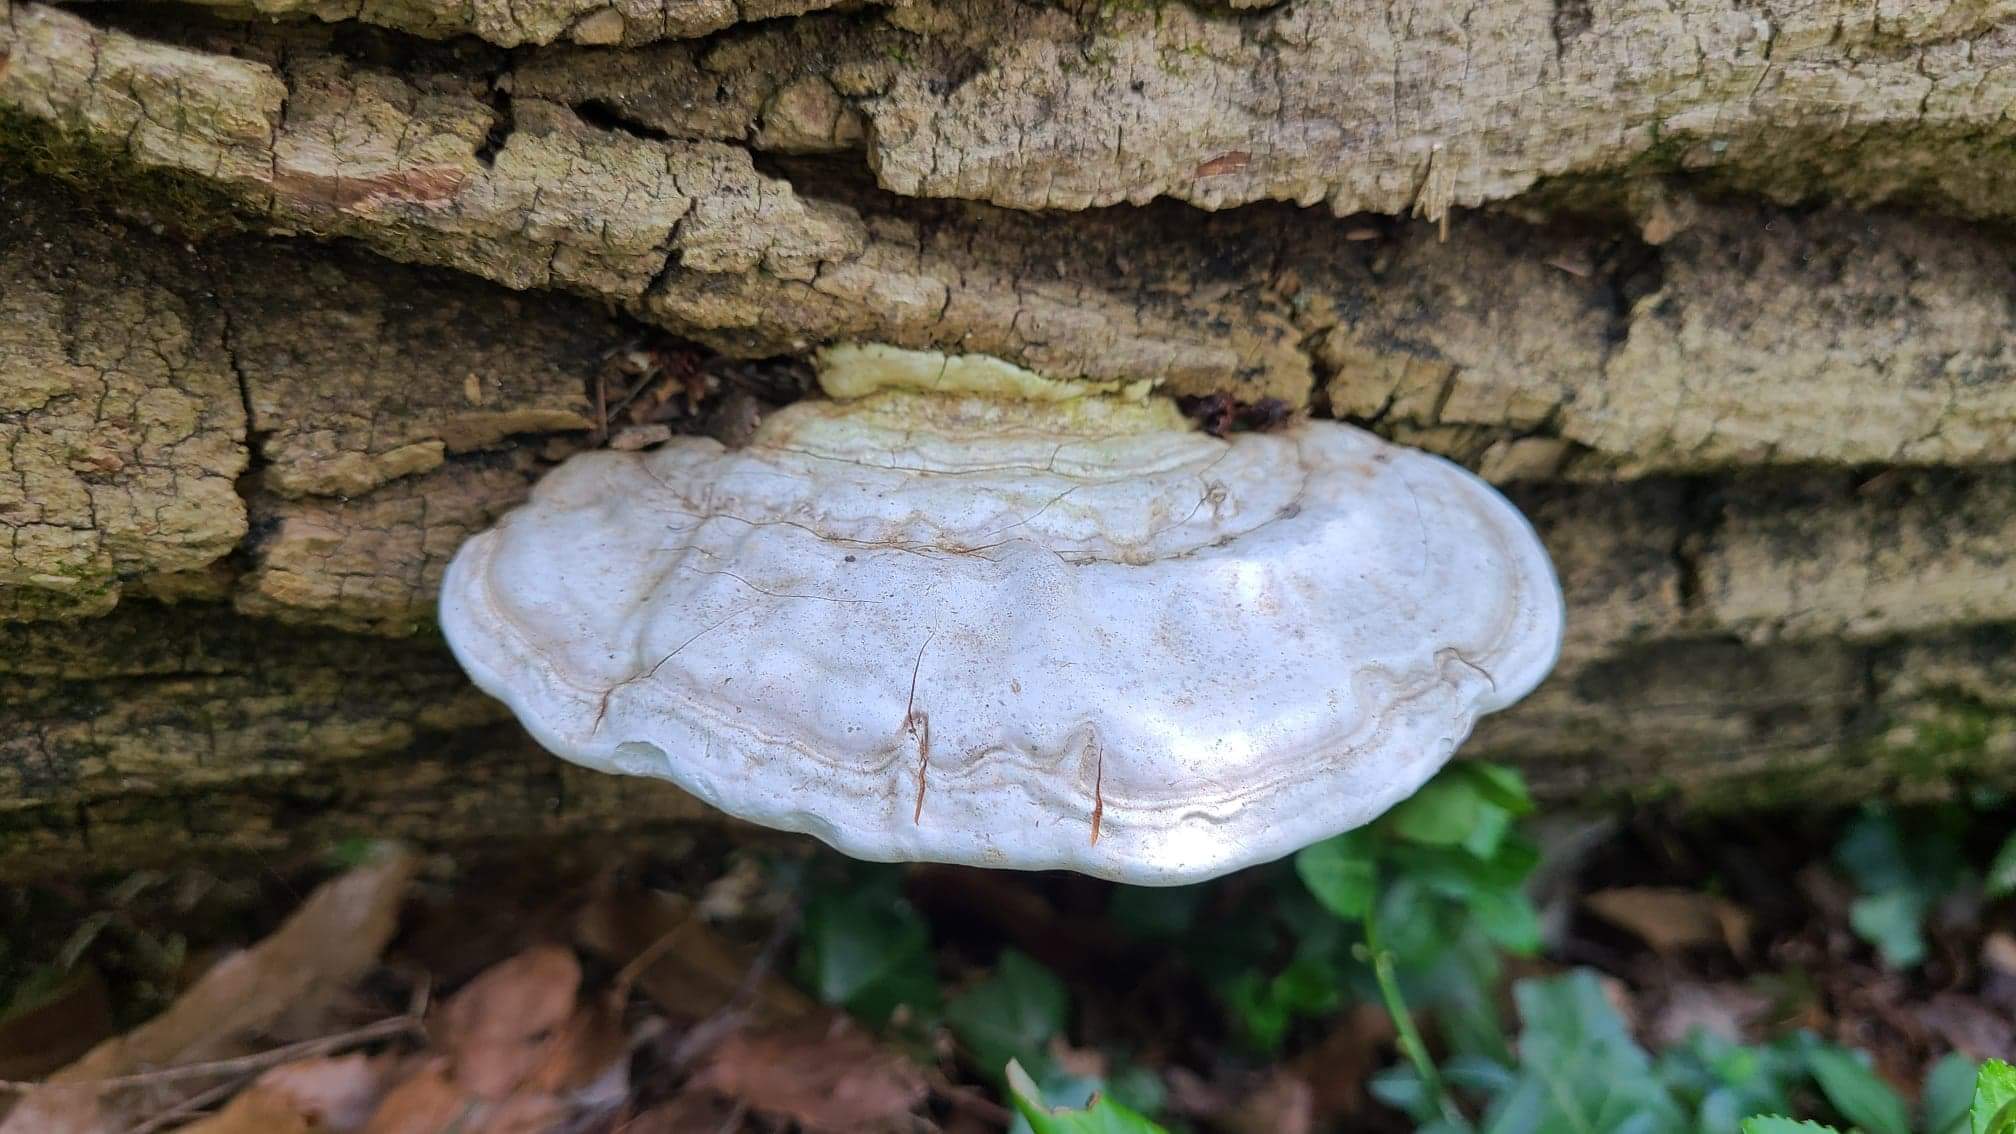 A flat white mushroom clinging to the bark of a fallen tree.